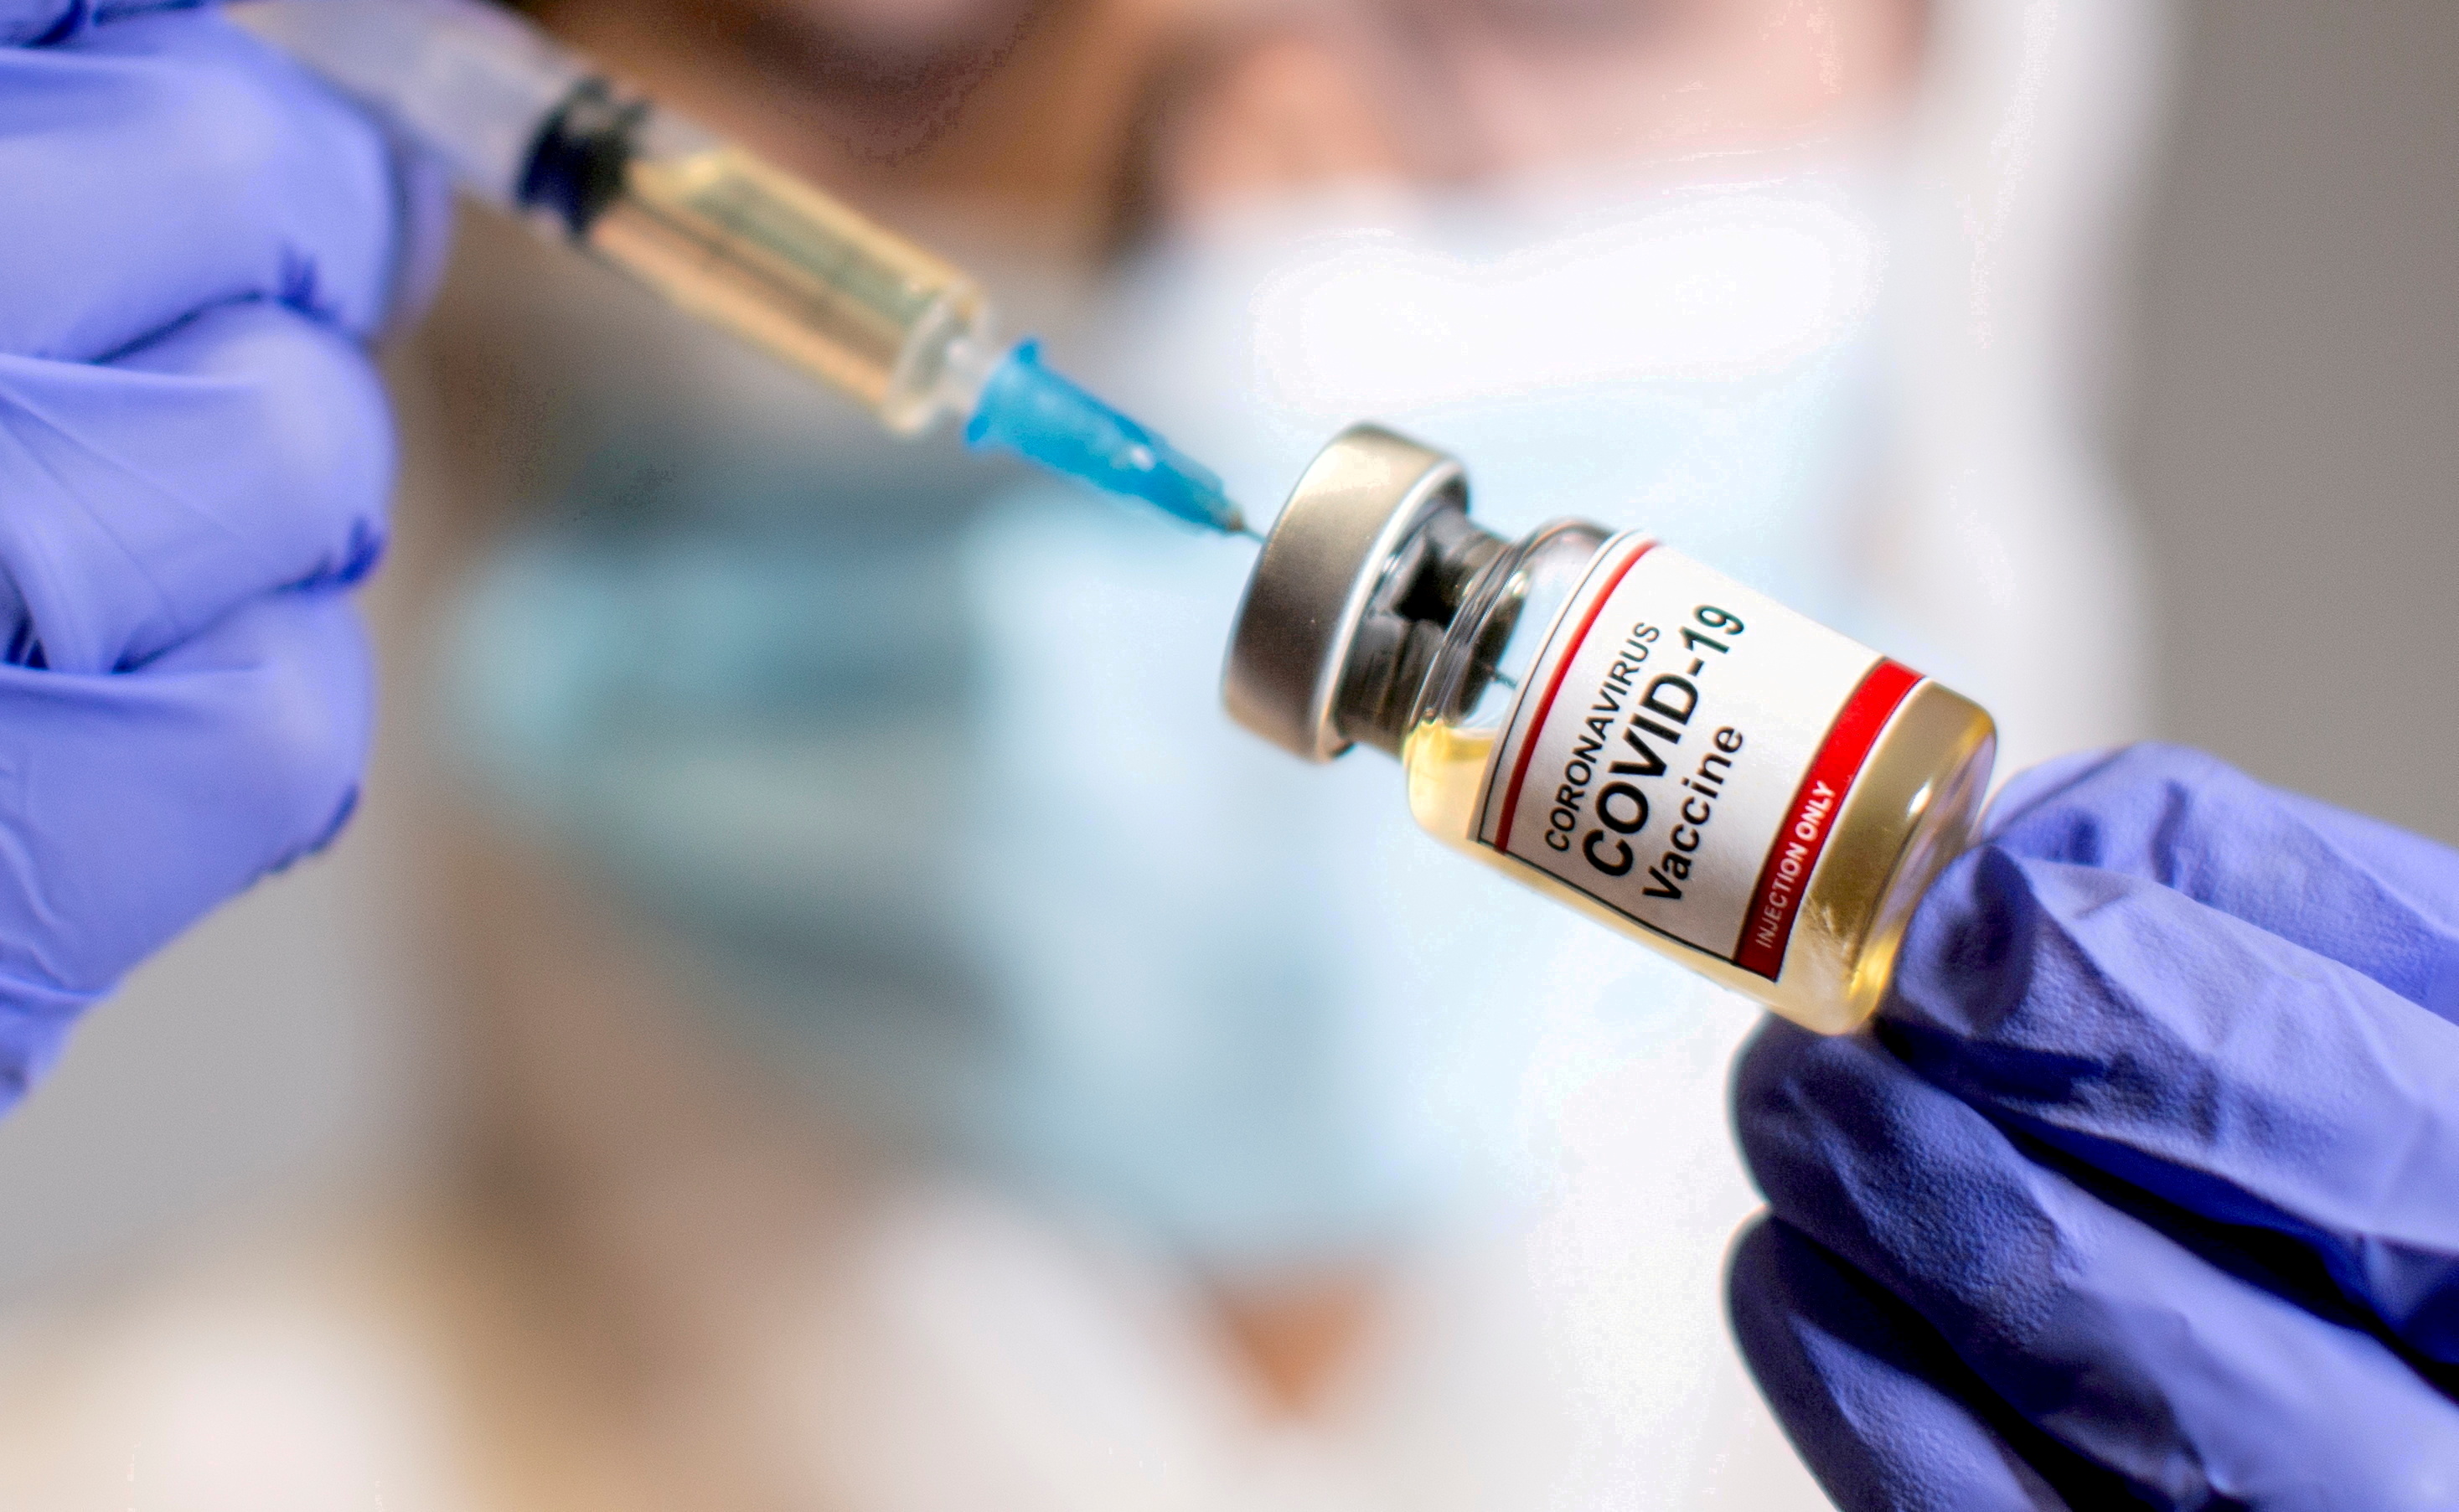 A woman holds a medical syringe and a small bottle labelled "Coronavirus COVID-19 Vaccine